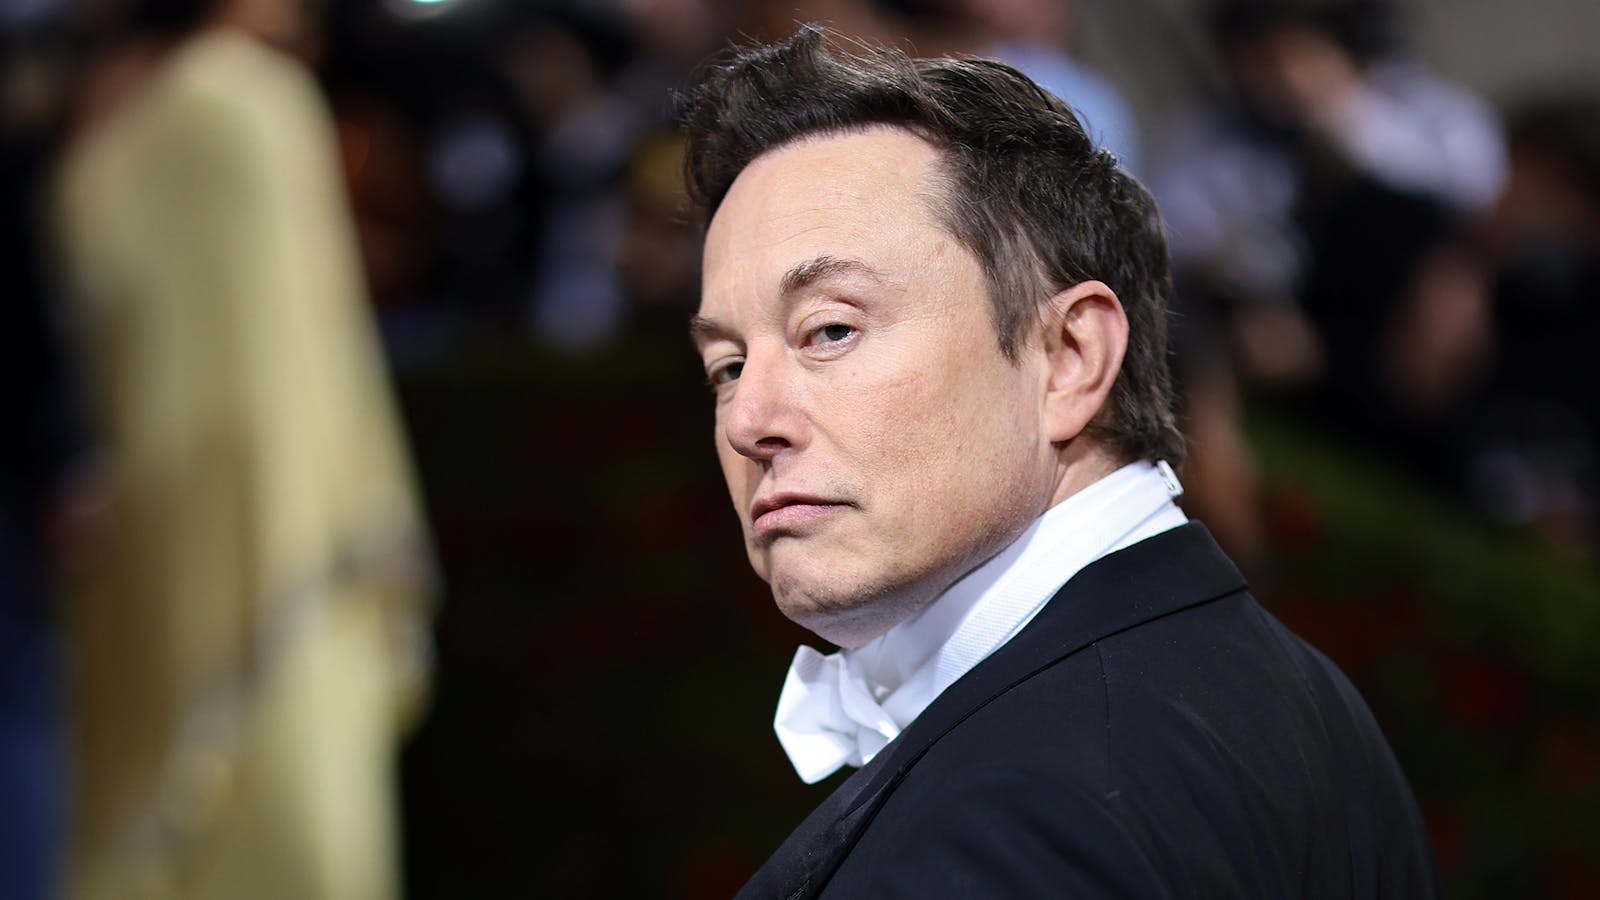 Elon Musk. Photo by Getty Images.